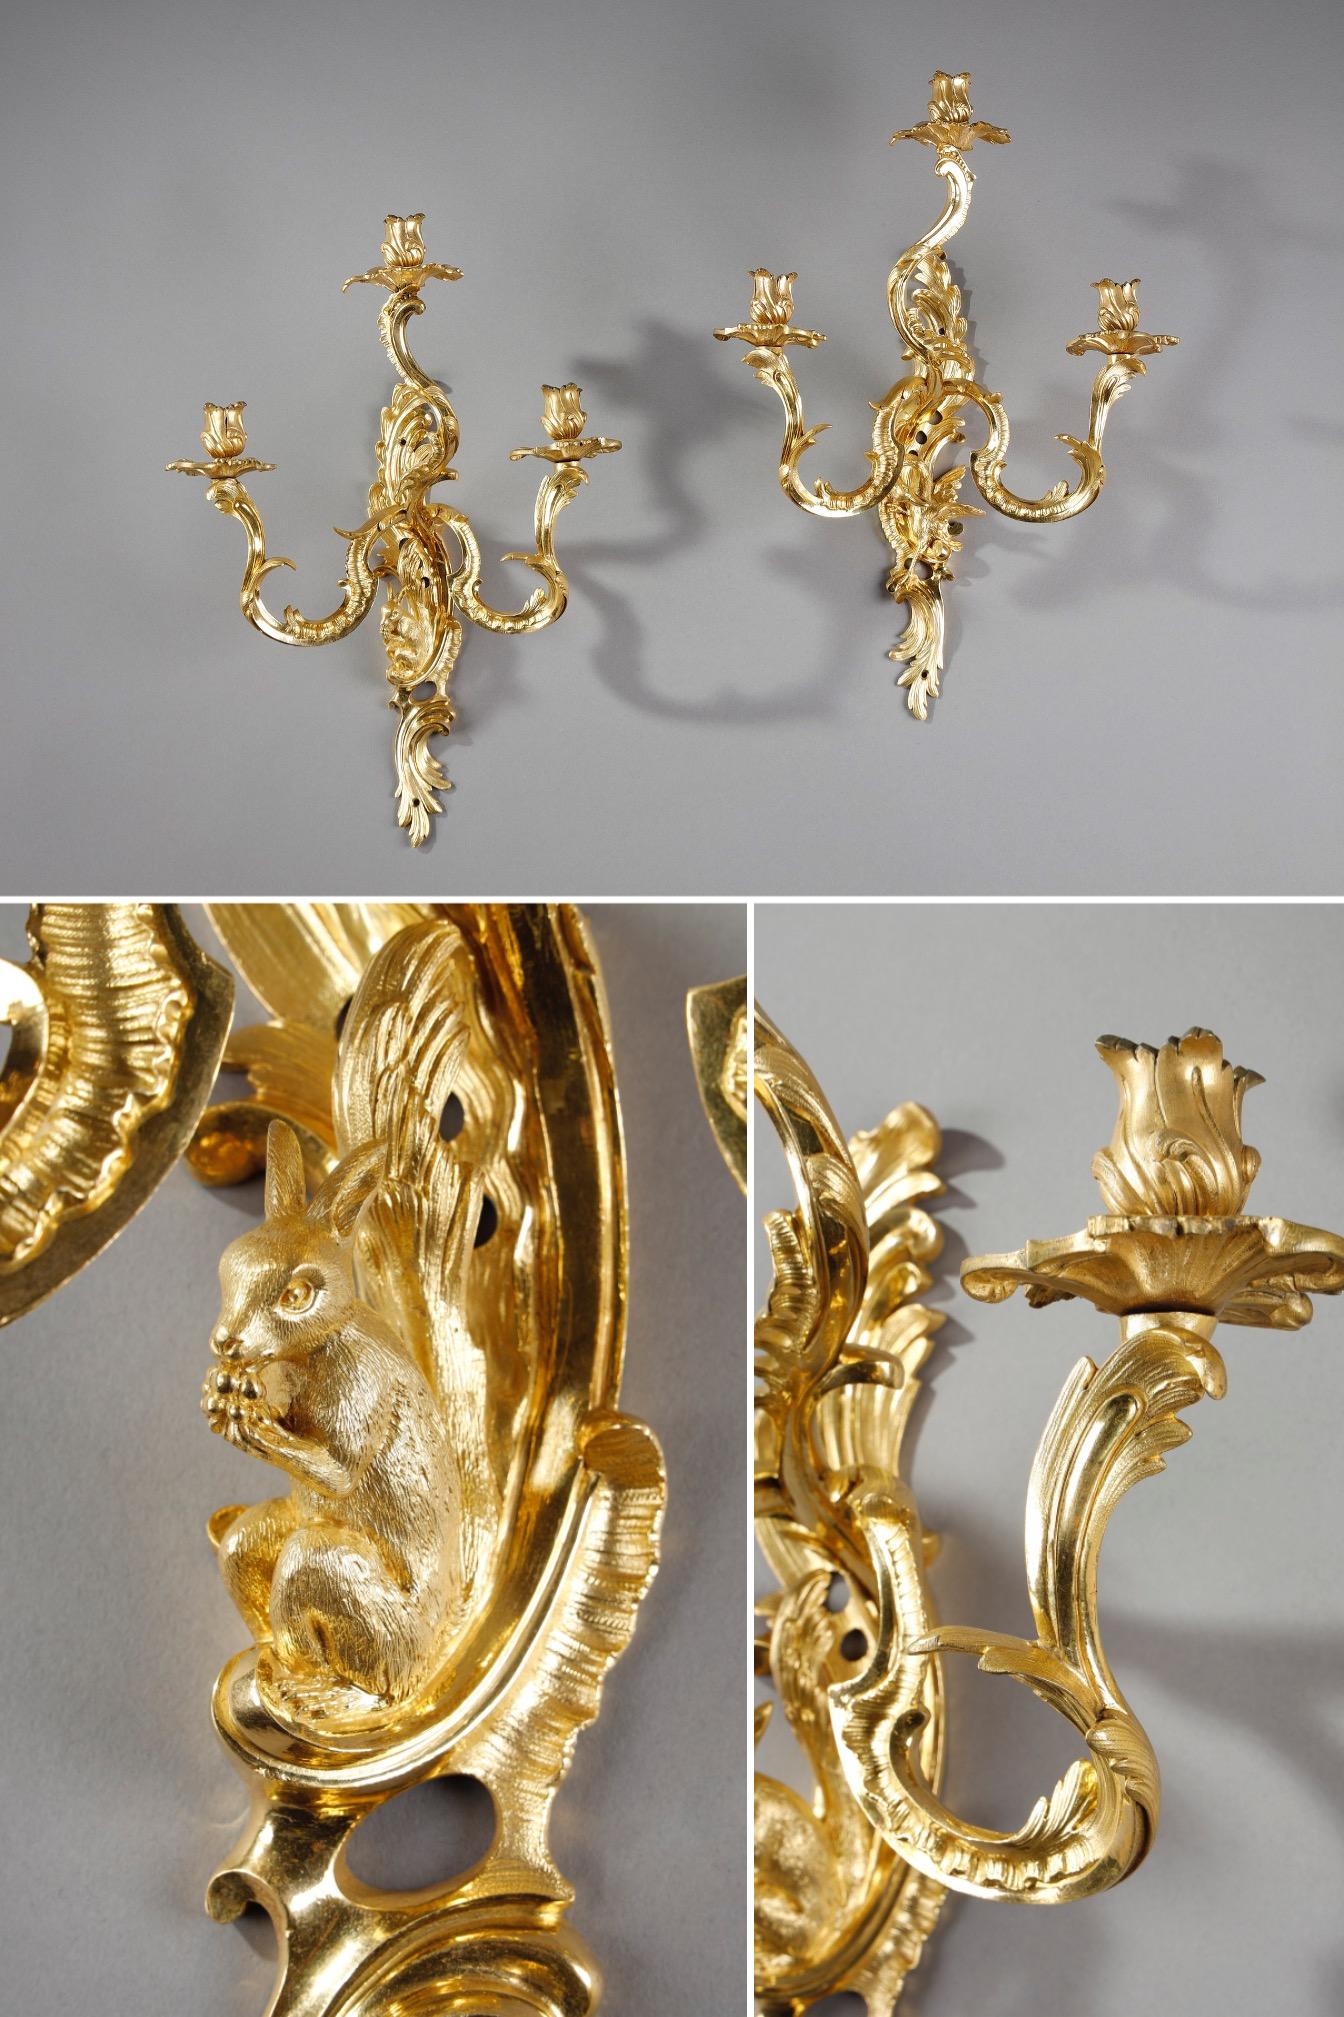 Pair of ormolu three-light sconces in the Louis XV style. The sconces are finely carved and chased with acanthus leaves and scrolling foliage. This rich, eventful decoration is typical of the Rocaille style, which flourished in France during the